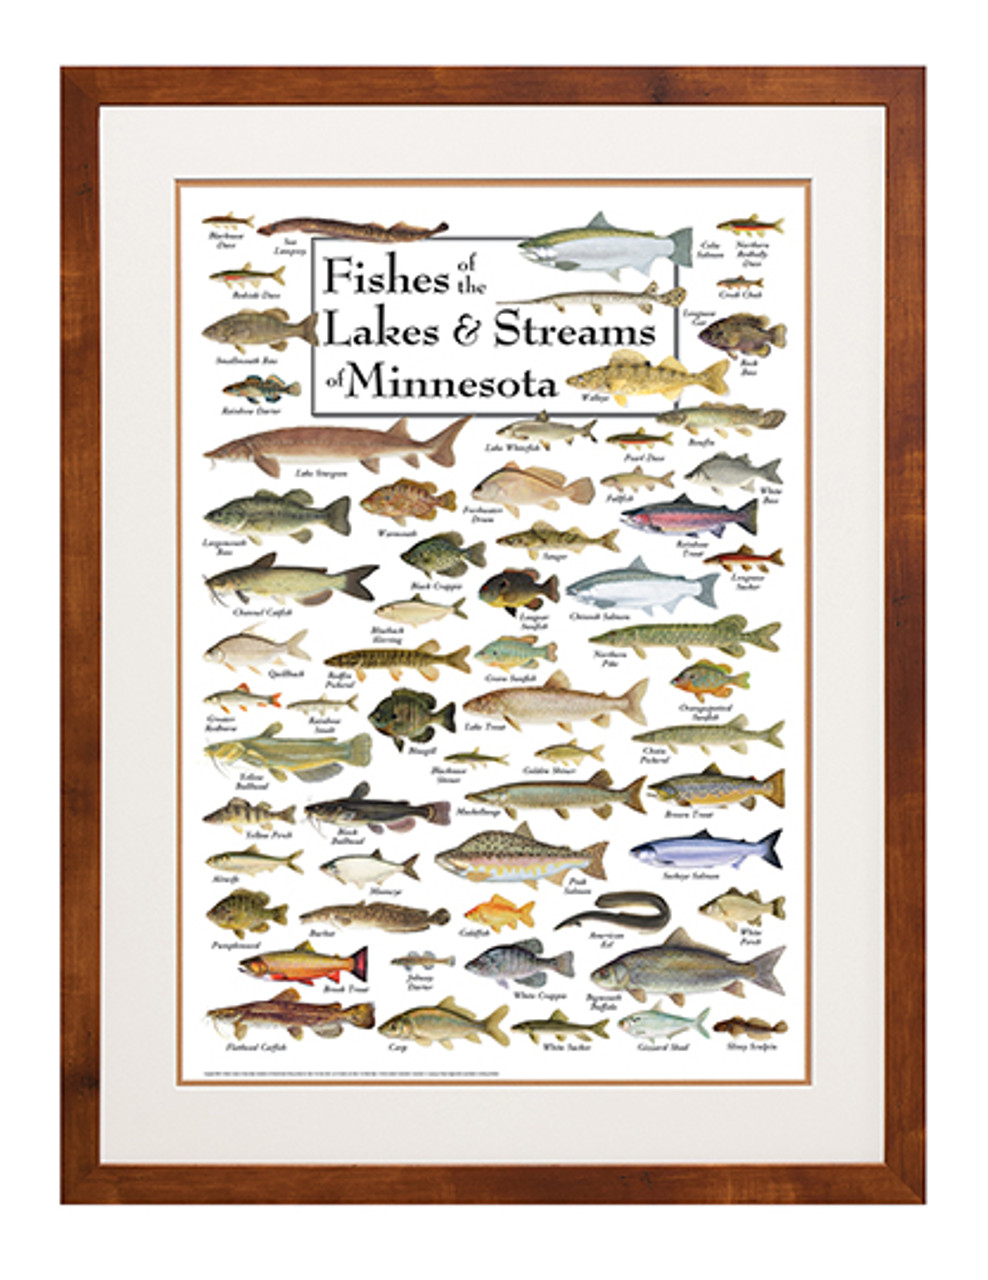 Fishes of Lakes & Streams of Minnesota Poster